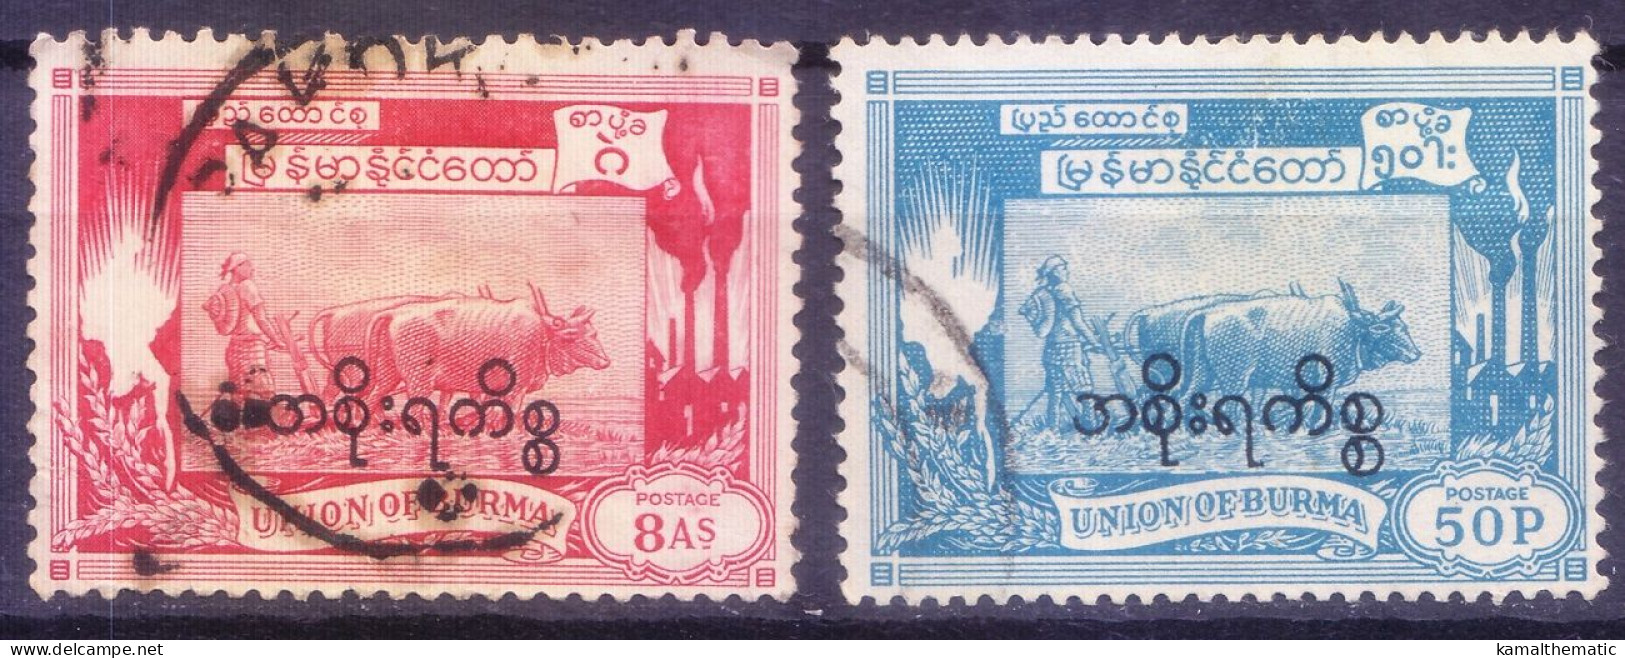 Burma Used 1949 1954 Ploughing Of Rice Field Overprinted - Agriculture